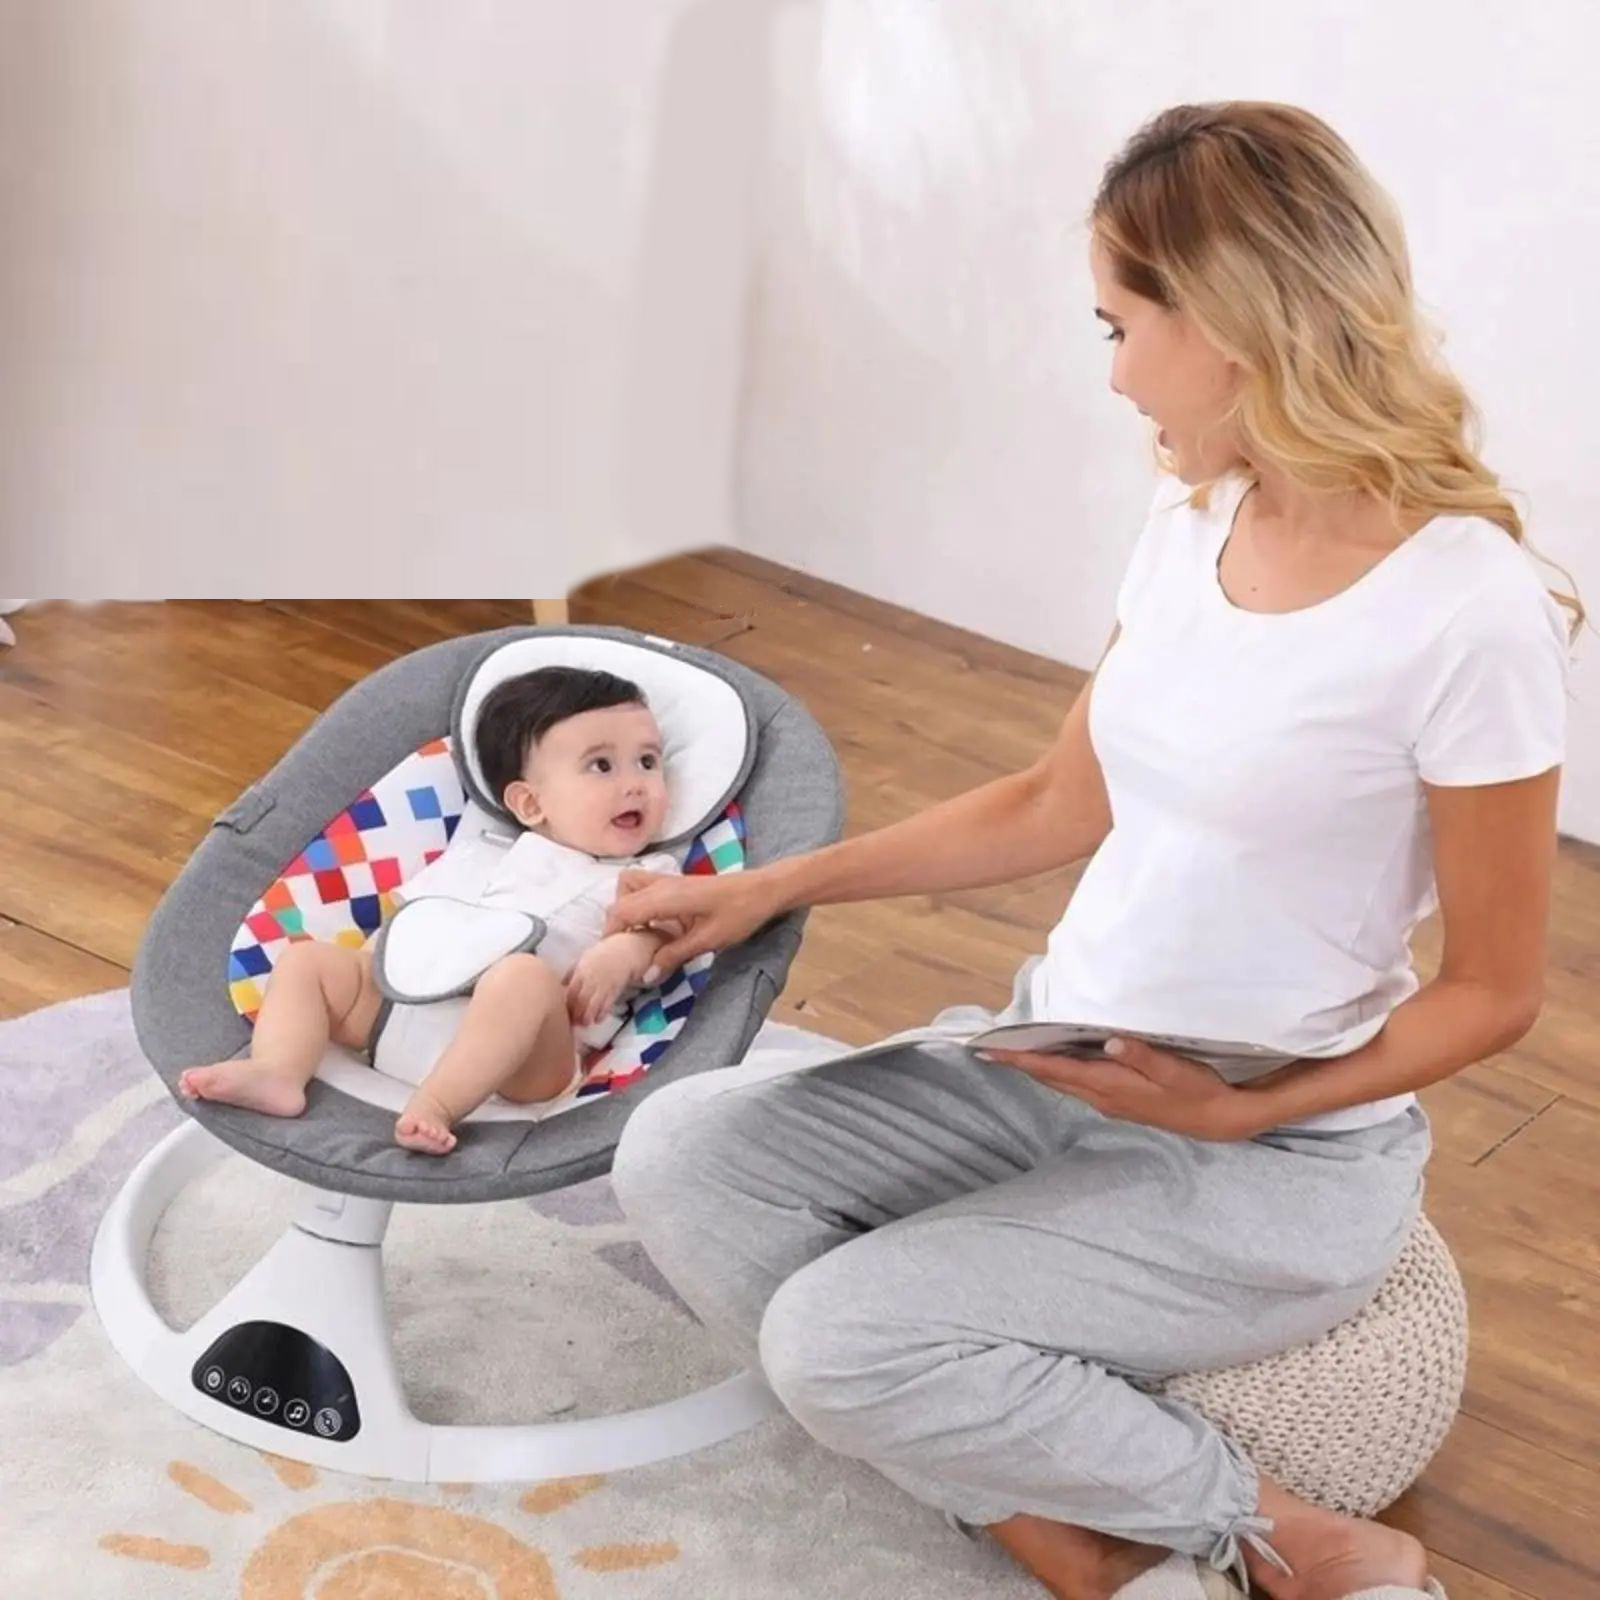 Grandeur Electric Baby Infant Swing Rocker Chair With Remote Control